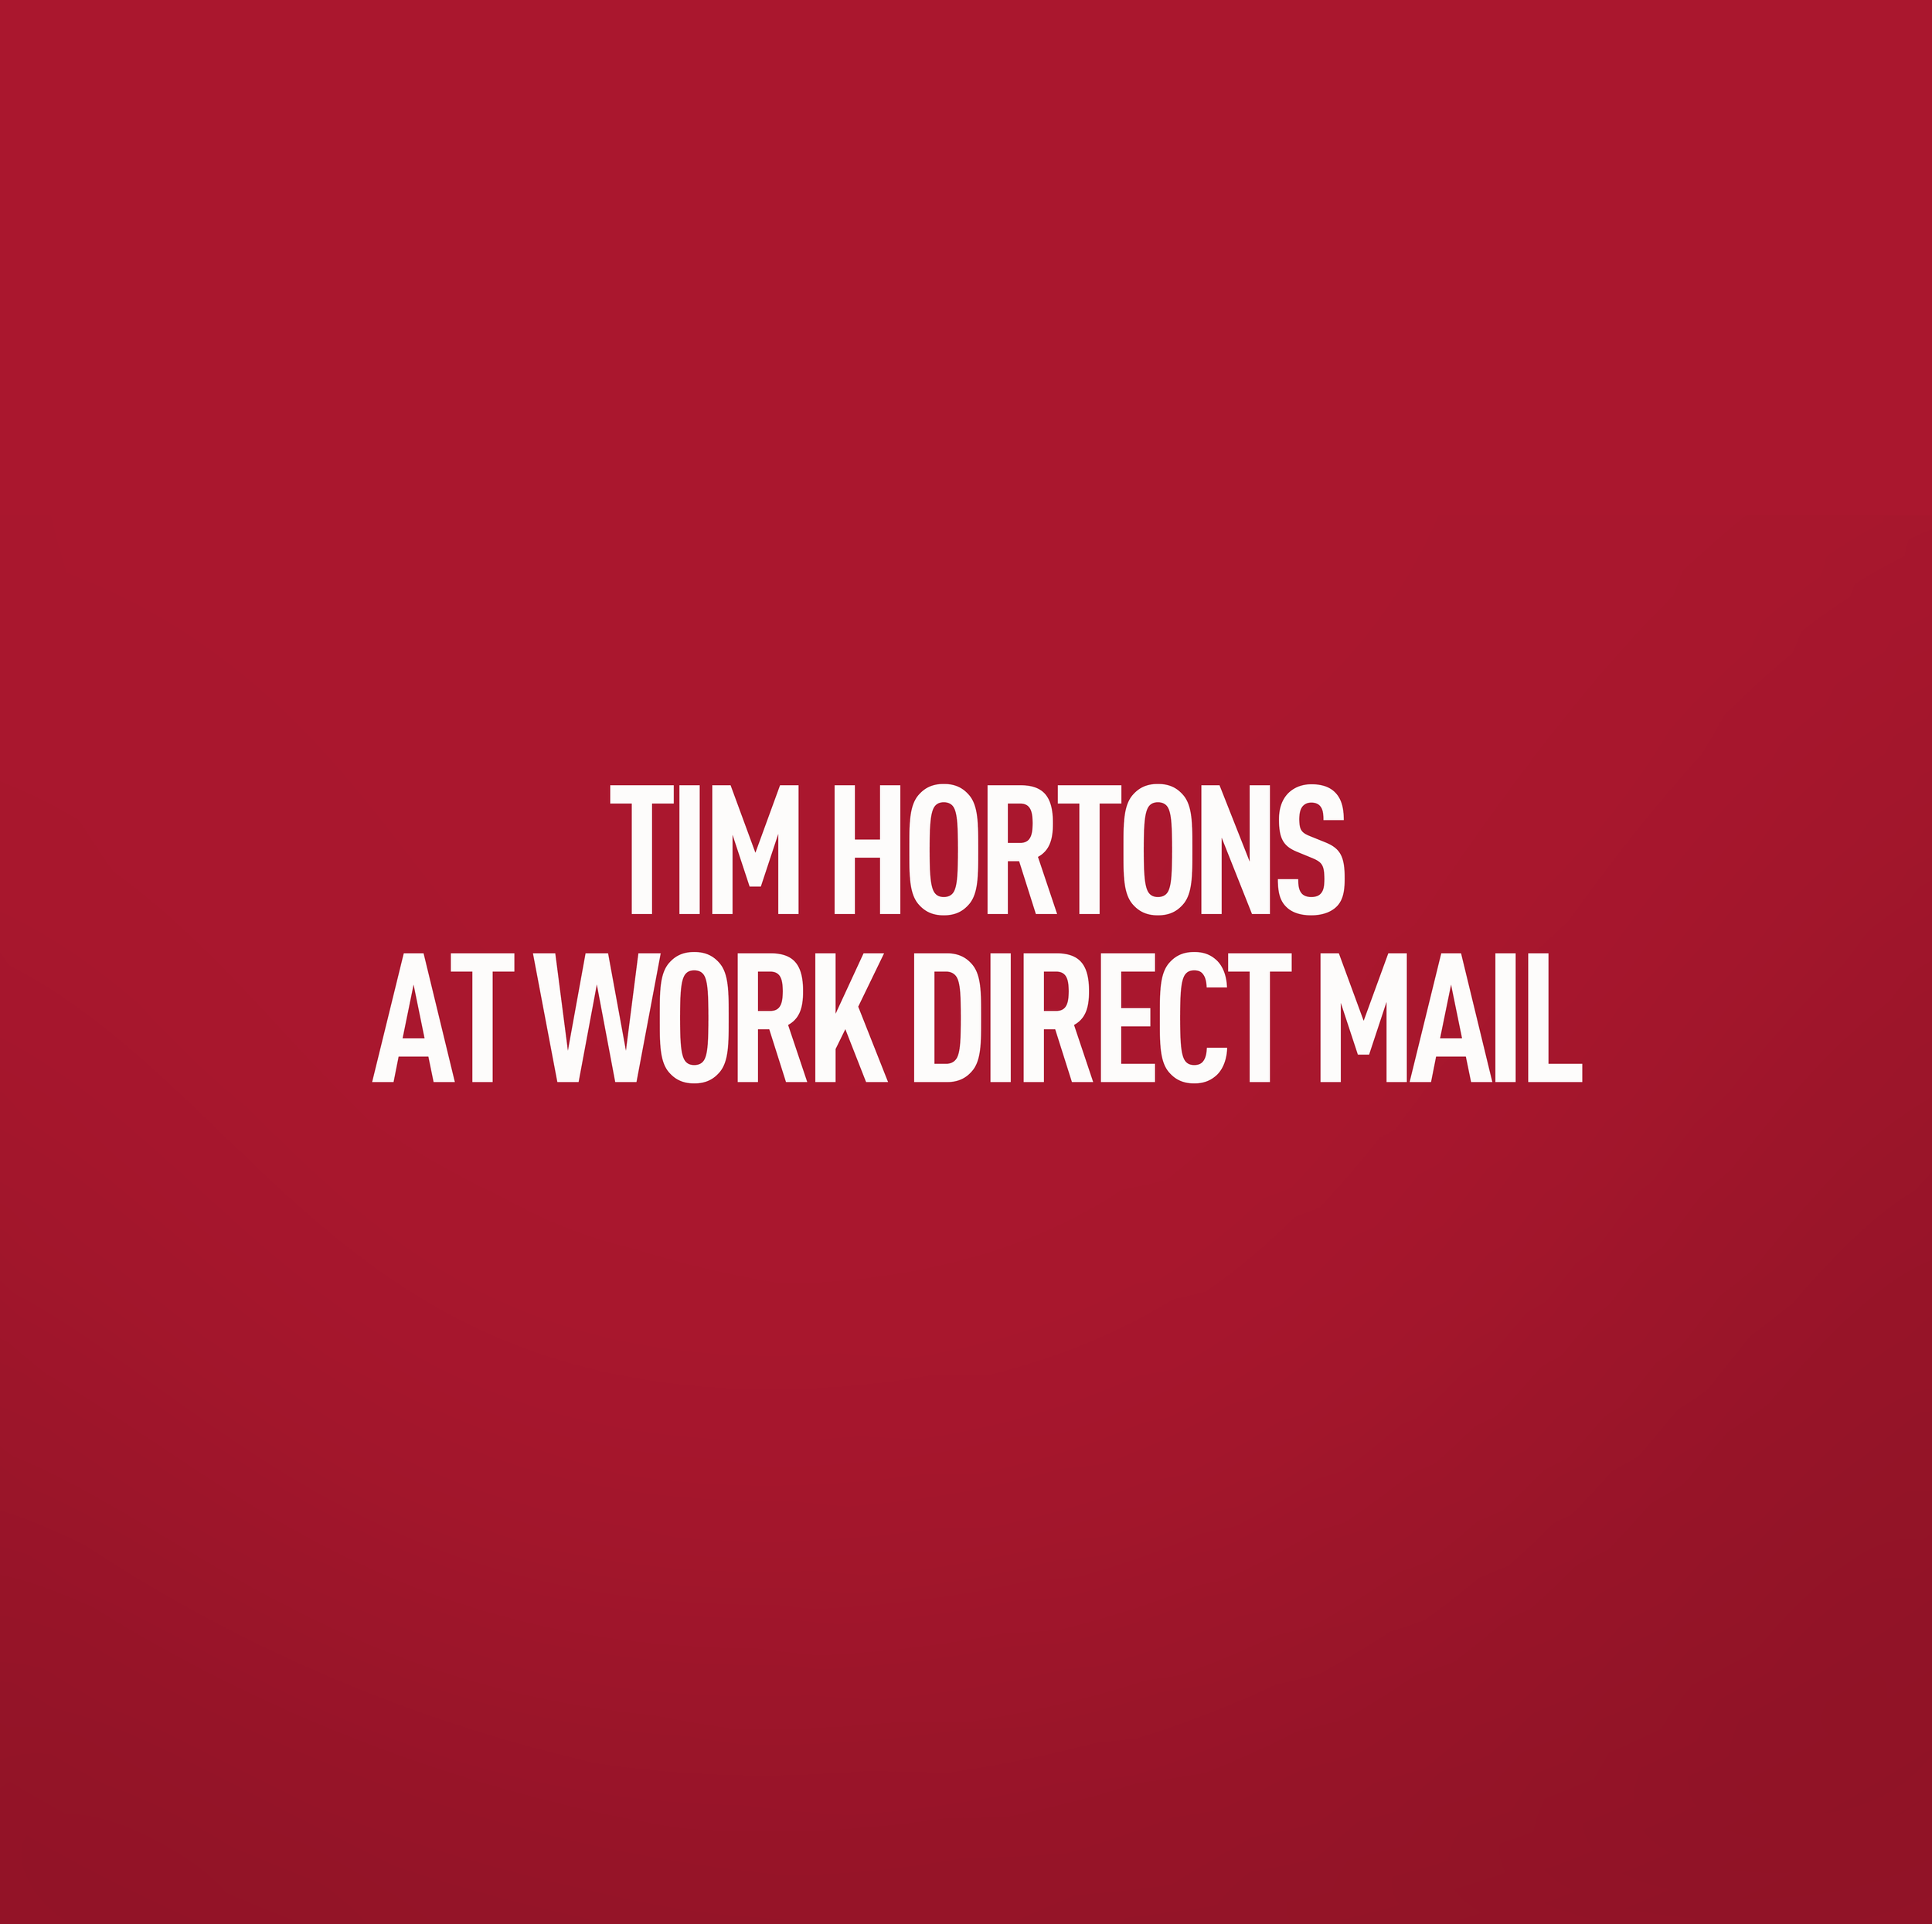 tim-hortons-at-work-direct-mail-title.png